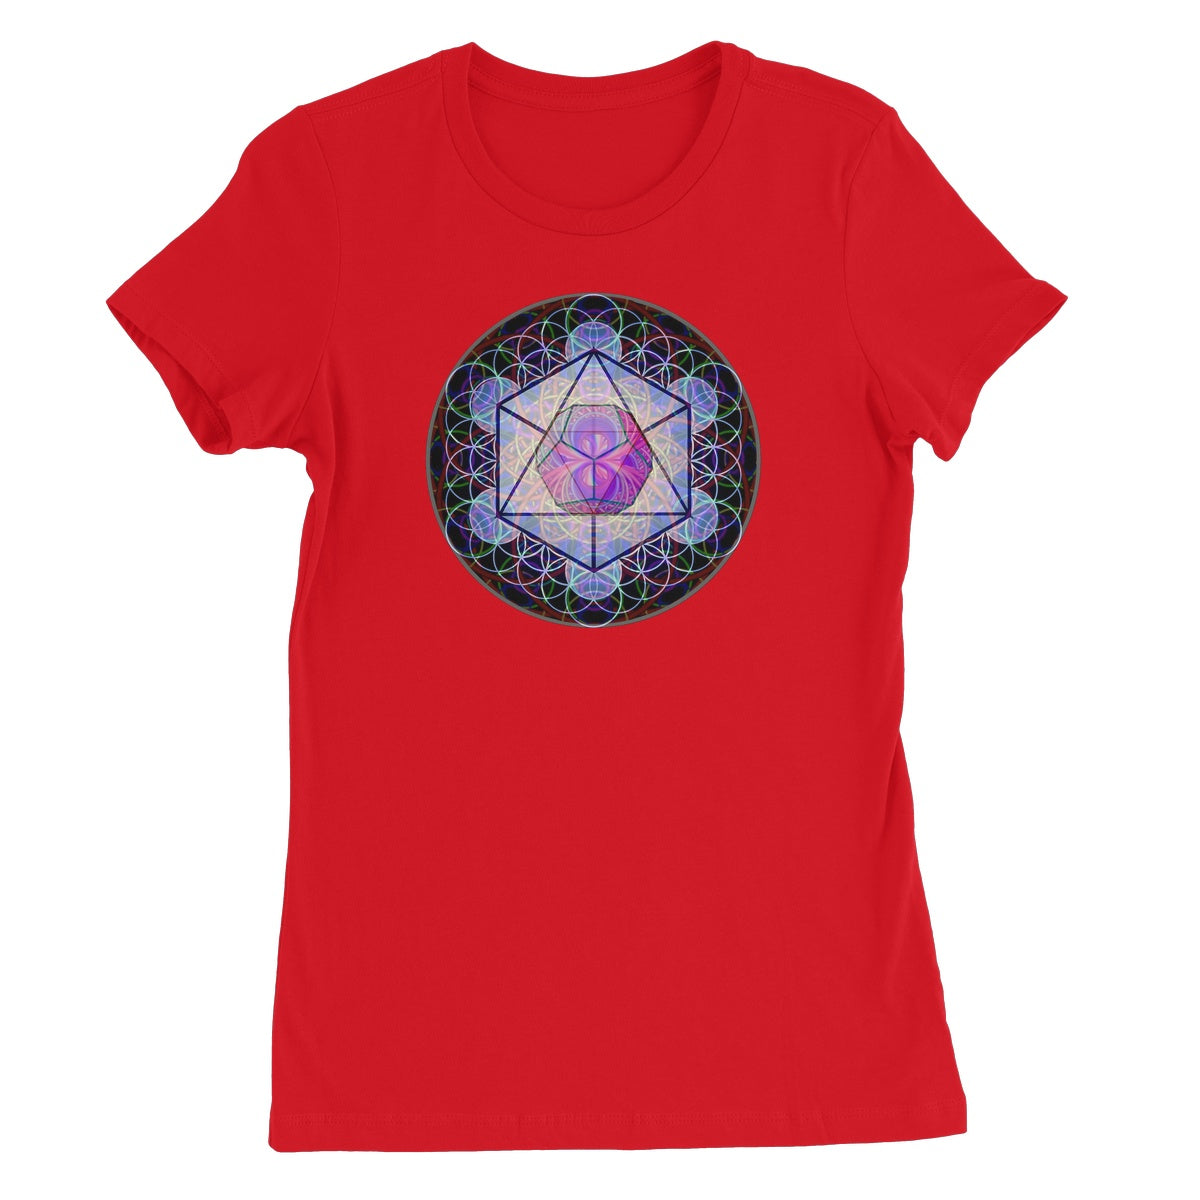 The Platonic Solid Dodecahedron Women's Favourite T-Shirt